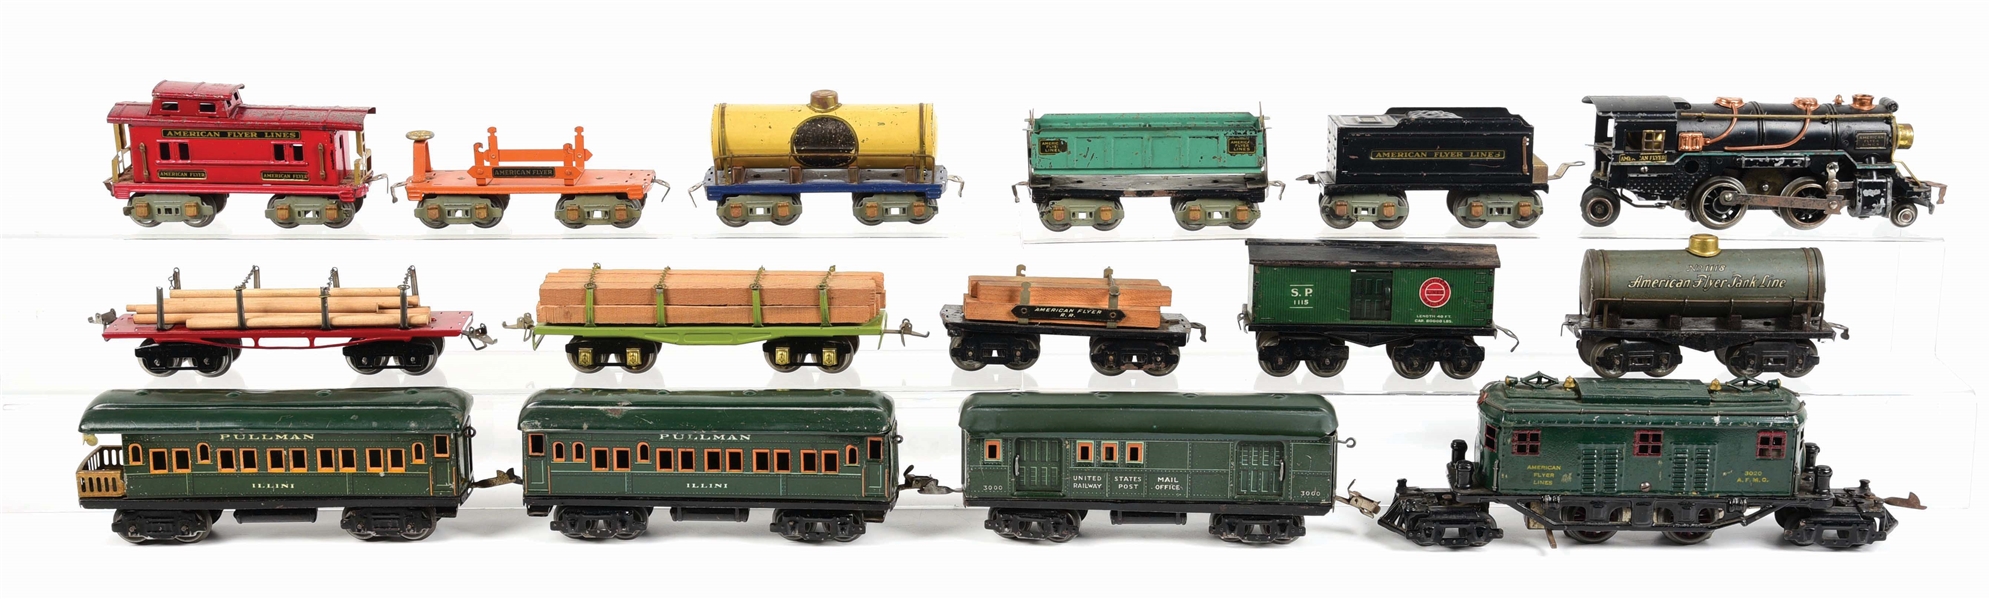 LARGE GROUPING OF AMERICAN FLYER PRE-WAR & IVES FREIGHT CARS, ENGINES & SOME PASSENGER CARS.